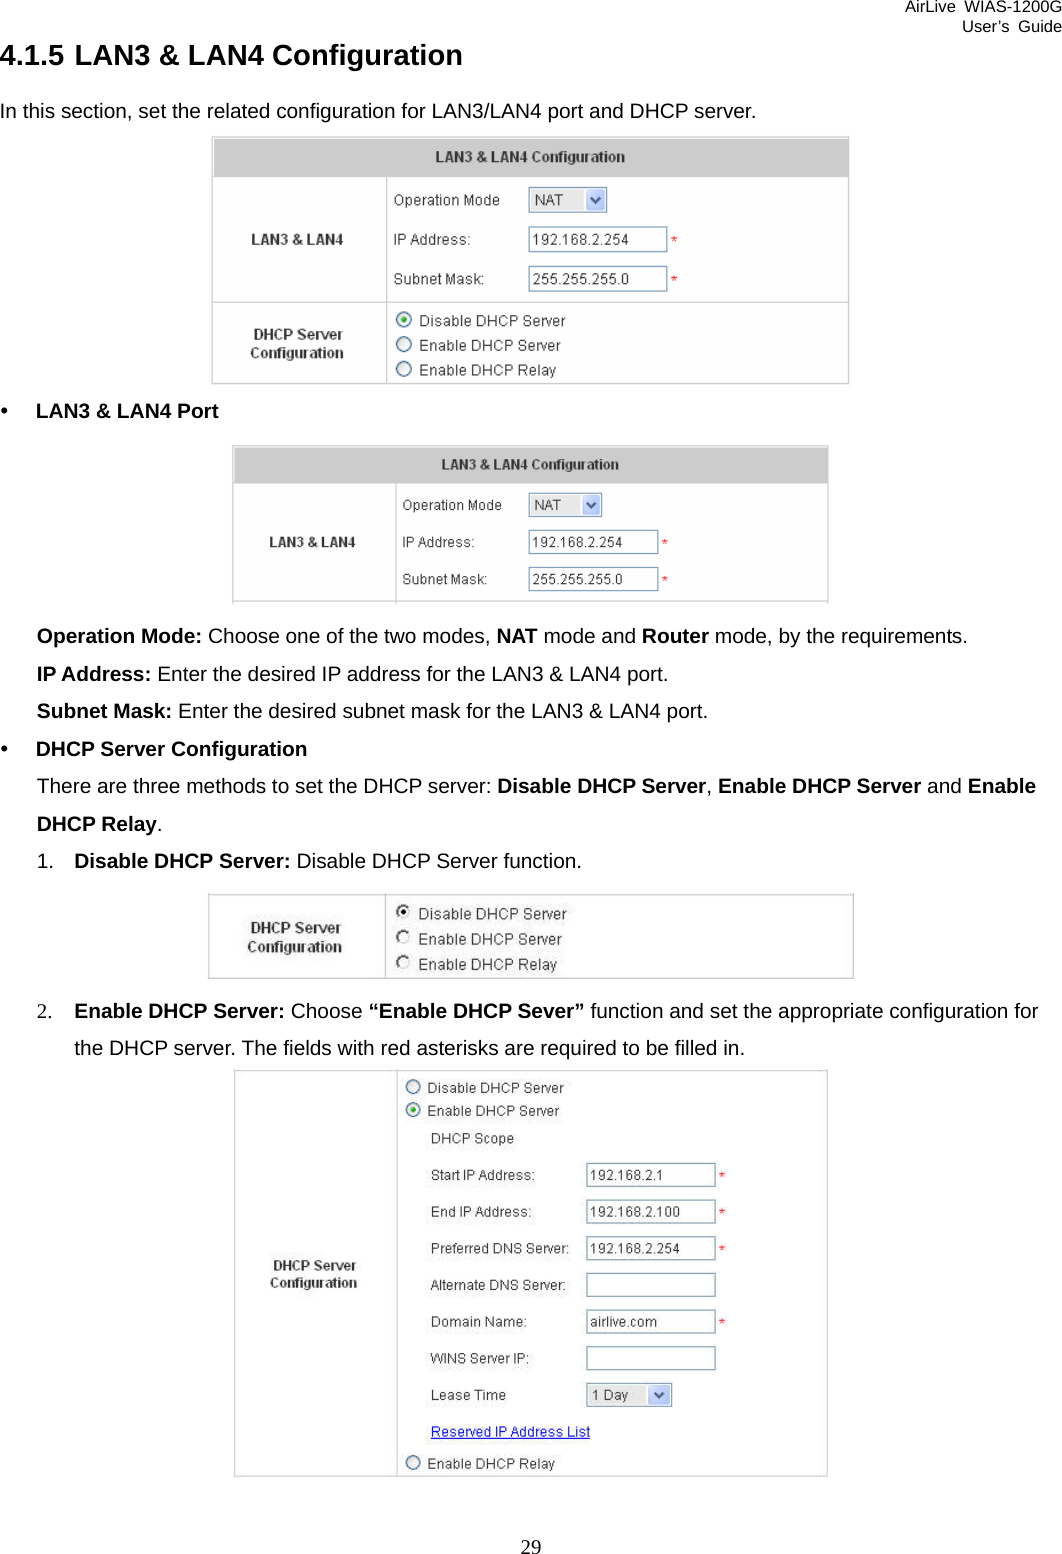 AirLive WIAS-1200G User’s Guide 29 4.1.5 LAN3 &amp; LAN4 Configuration In this section, set the related configuration for LAN3/LAN4 port and DHCP server.  y LAN3 &amp; LAN4 Port  Operation Mode: Choose one of the two modes, NAT mode and Router mode, by the requirements. IP Address: Enter the desired IP address for the LAN3 &amp; LAN4 port. Subnet Mask: Enter the desired subnet mask for the LAN3 &amp; LAN4 port. y DHCP Server Configuration There are three methods to set the DHCP server: Disable DHCP Server, Enable DHCP Server and Enable DHCP Relay. 1.  Disable DHCP Server: Disable DHCP Server function.  2. Enable DHCP Server: Choose “Enable DHCP Sever” function and set the appropriate configuration for the DHCP server. The fields with red asterisks are required to be filled in.   